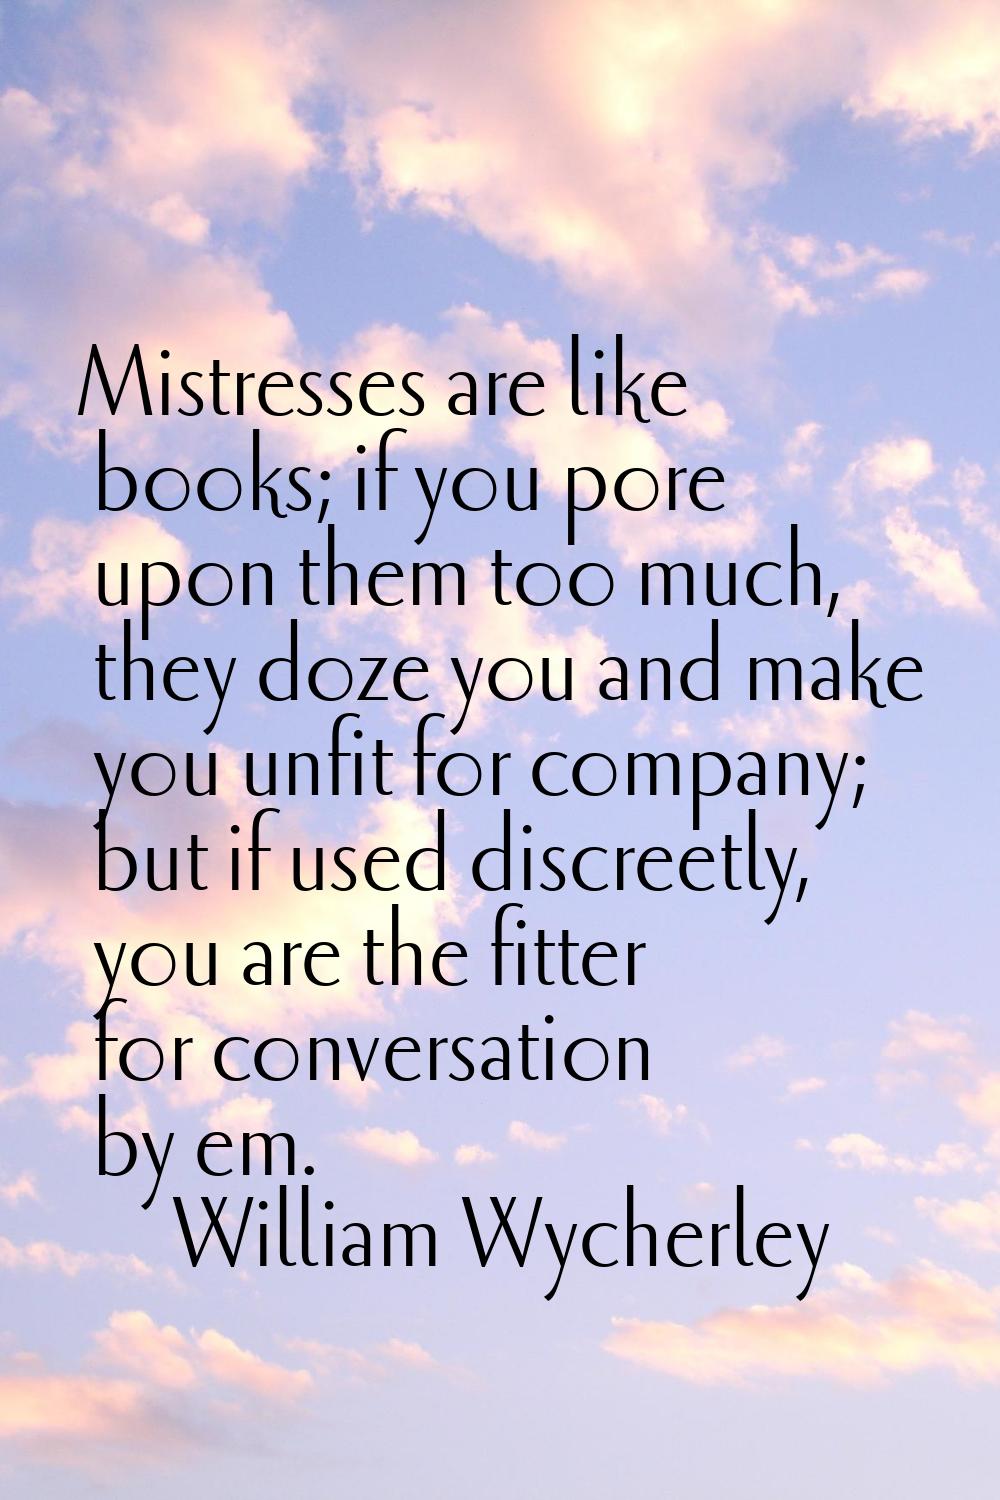 Mistresses are like books; if you pore upon them too much, they doze you and make you unfit for com